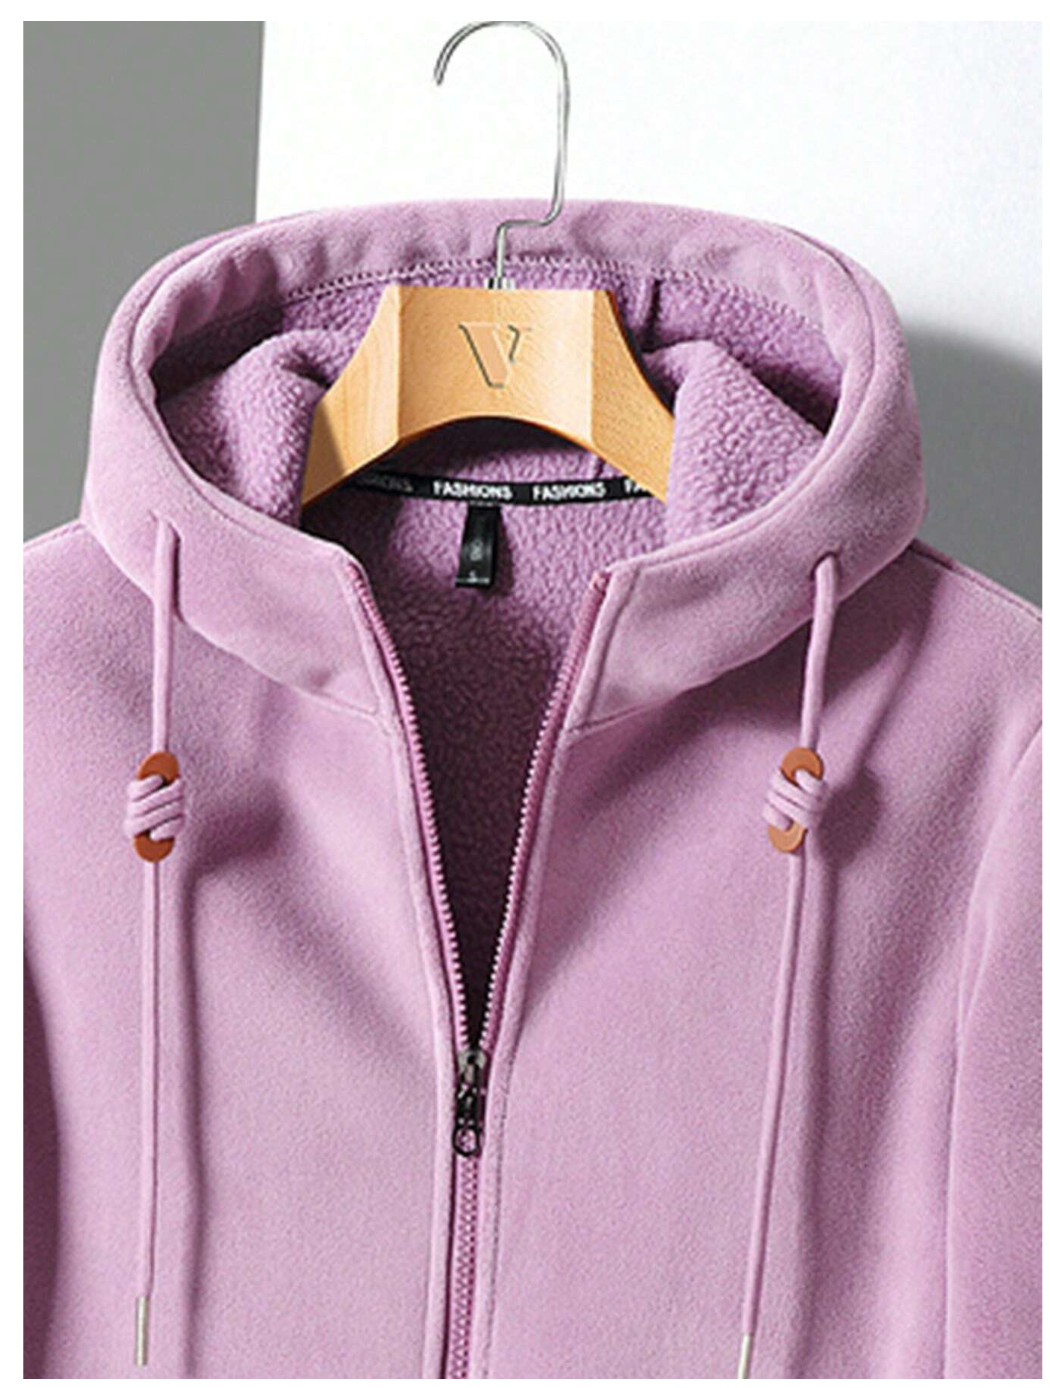 Luxurious Warmth: Embrace Winter in Style with Our Women's Corduroy Hooded Fleece Jacket Adorned with Plush Lamb Hair Lining!